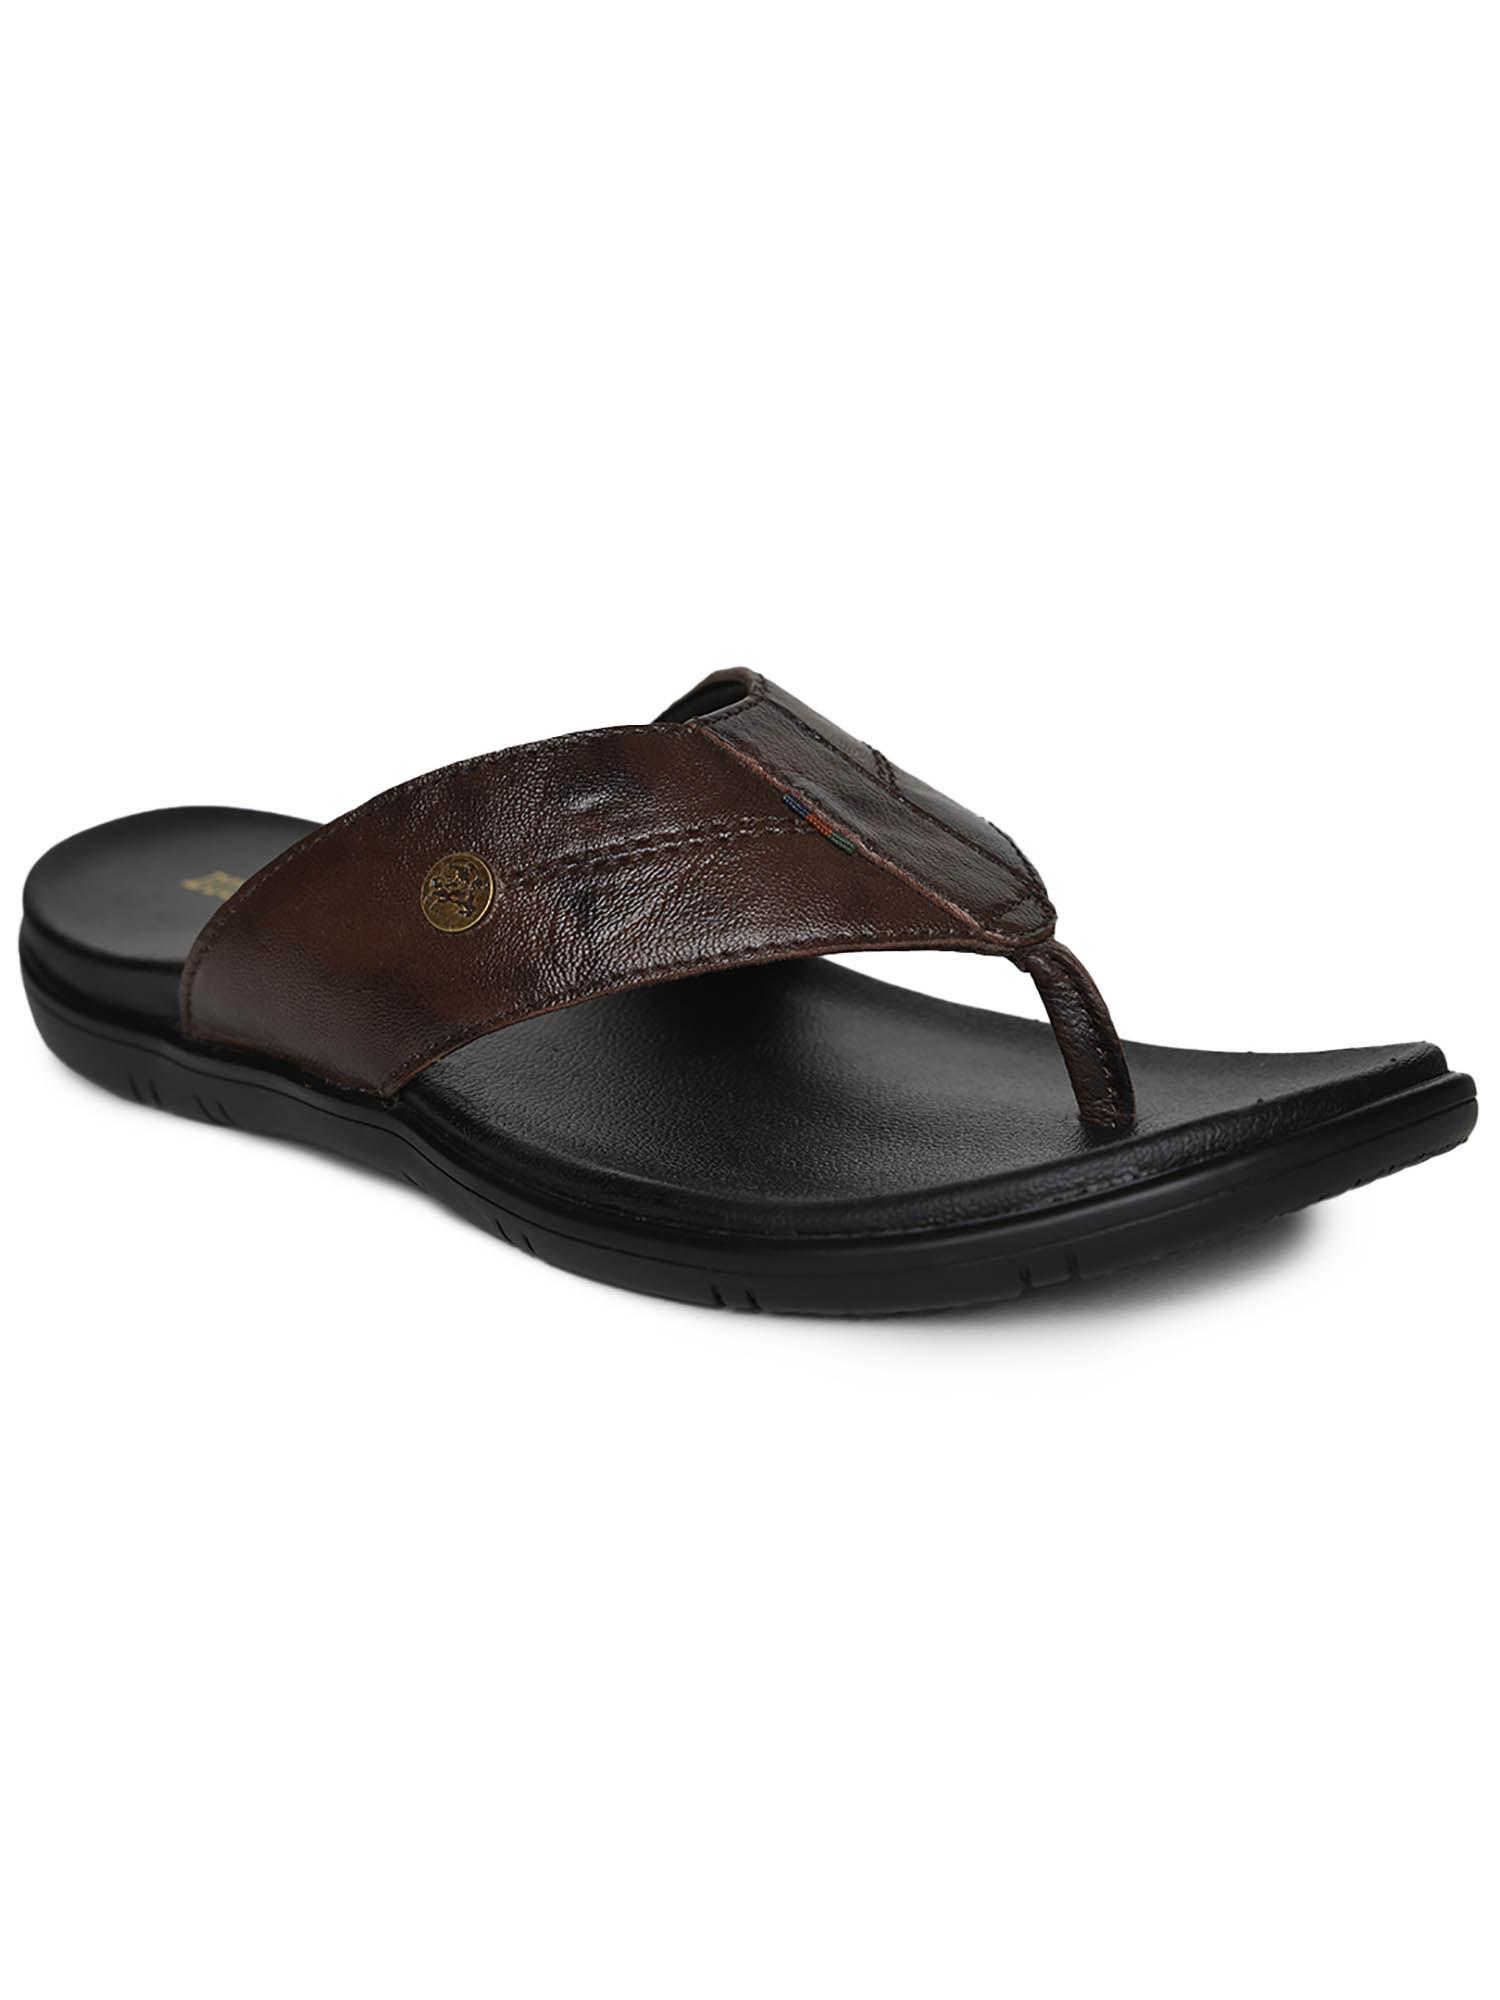 sando-full-grain-natural-leather-casual-sandals-for-mens